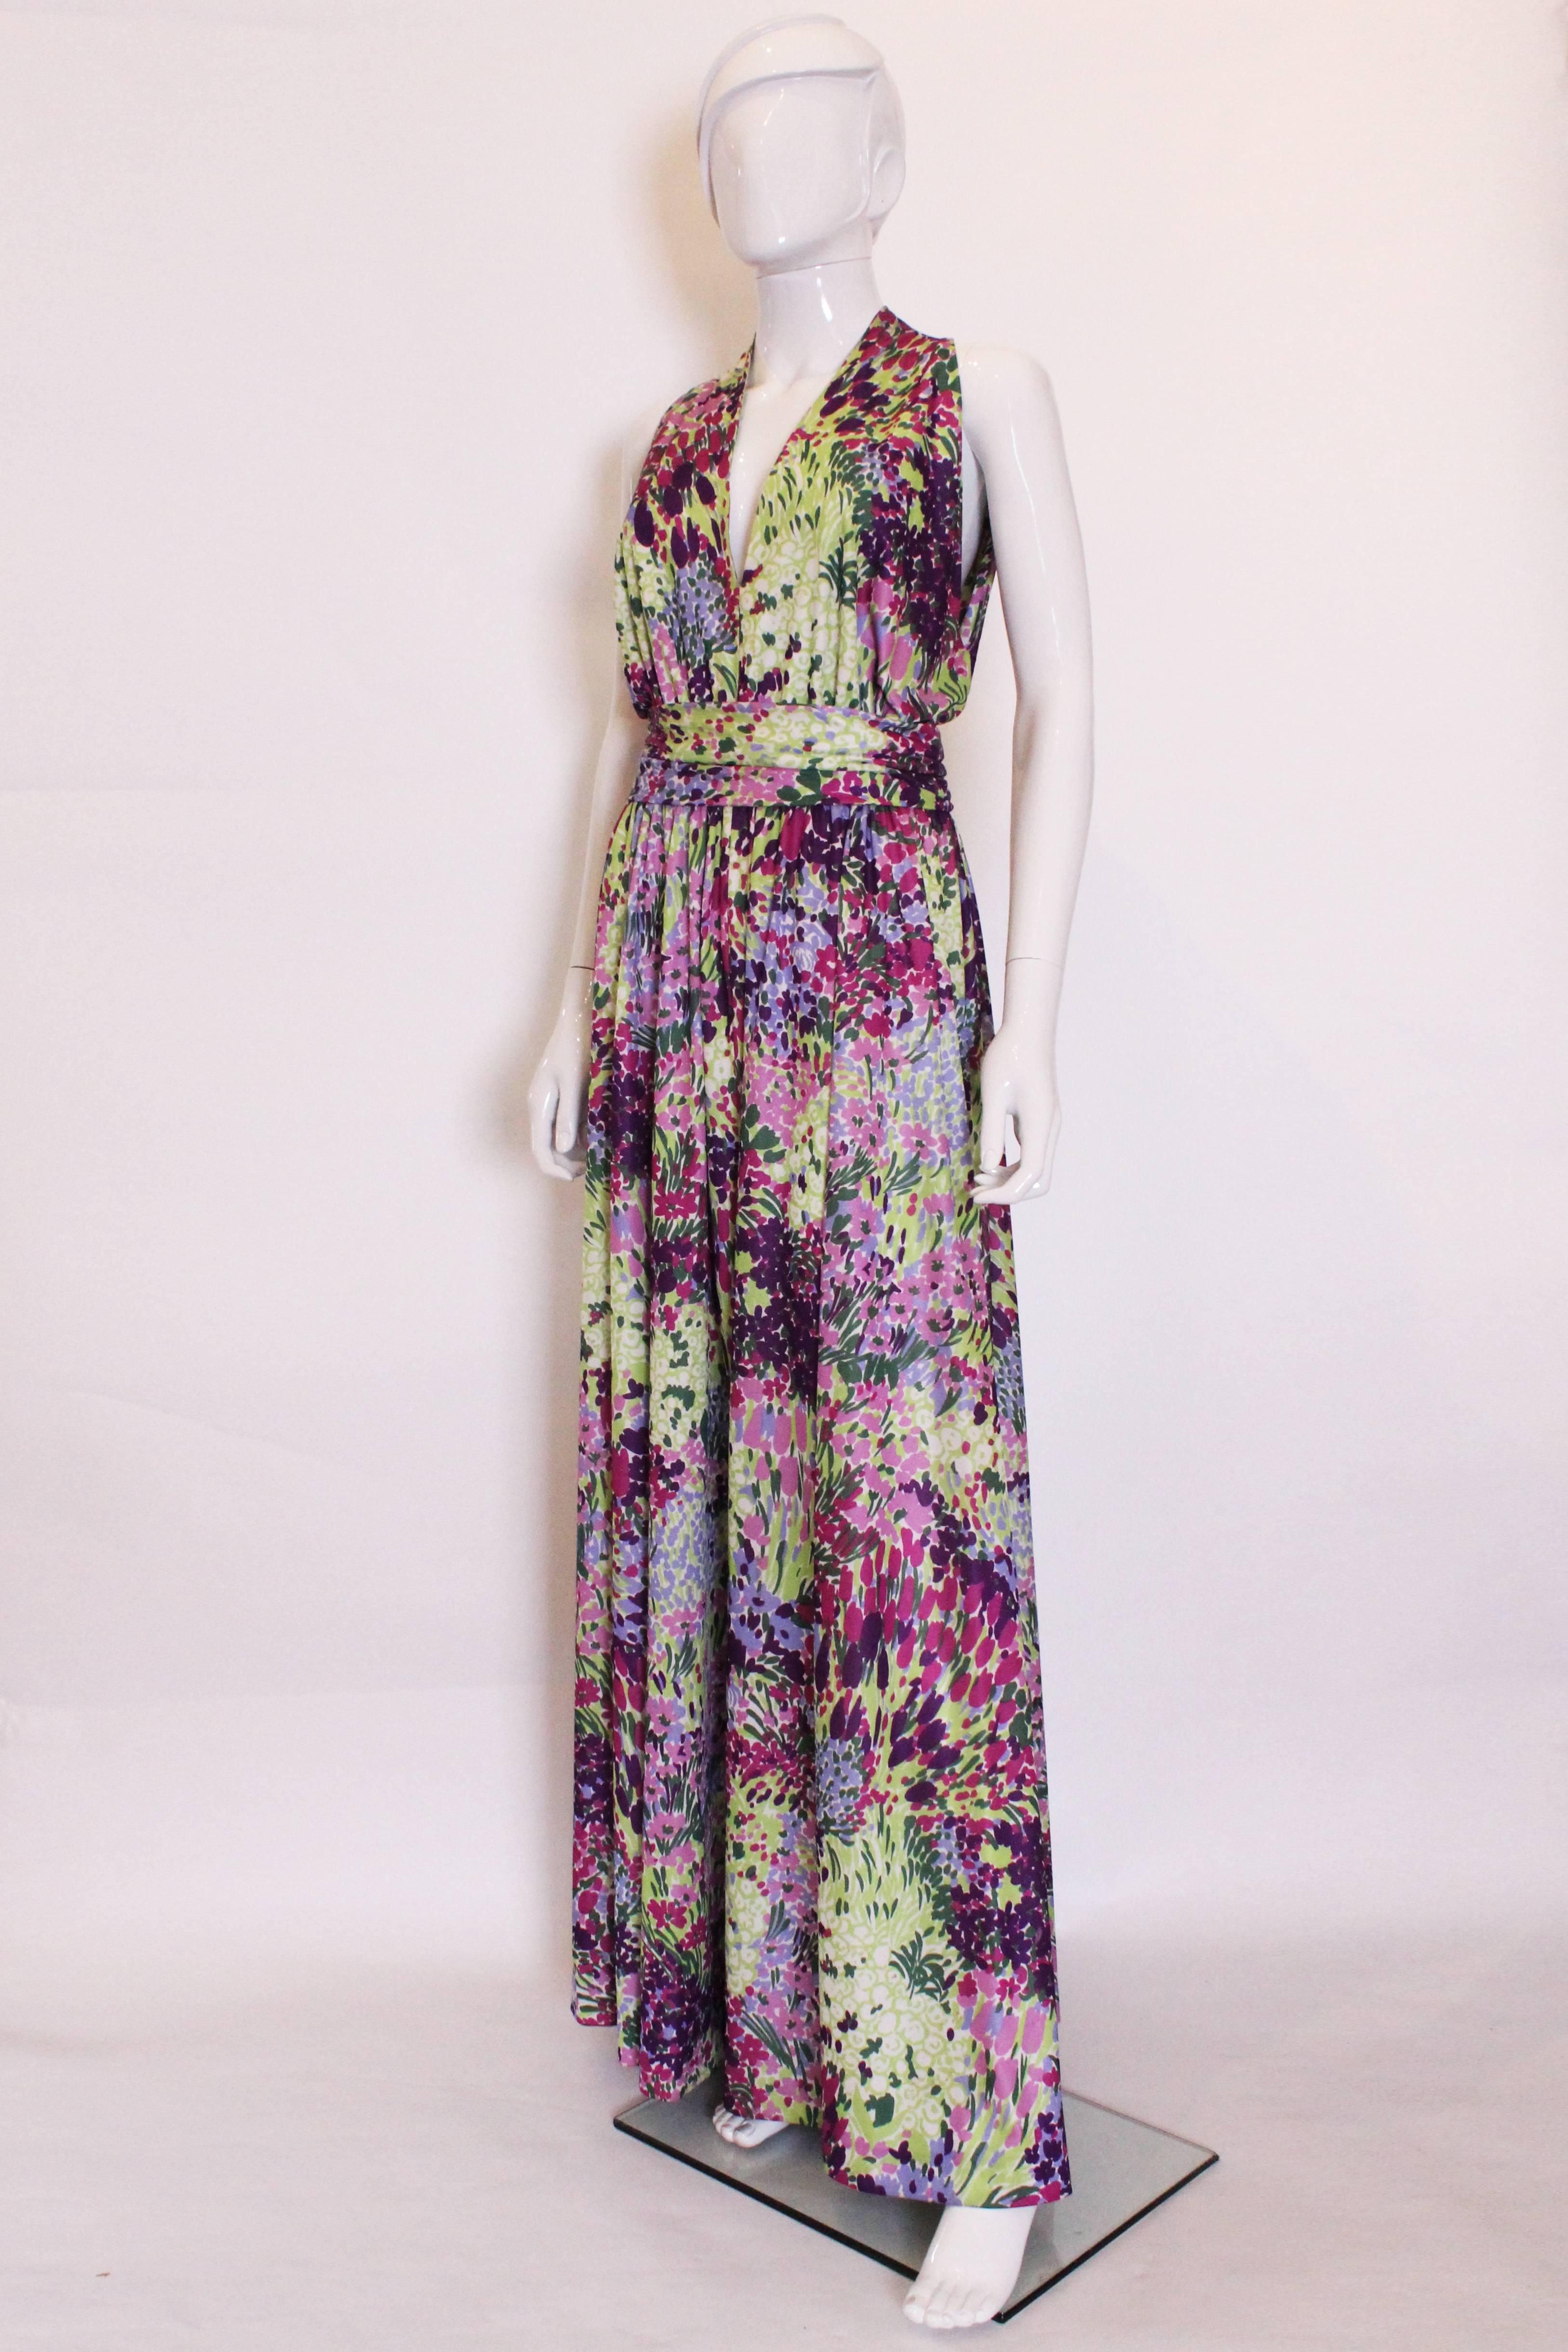 Stunning for Summer. This floral gown by British firm Berketx is a real head turner. In a vivid mix of colours , greens, lilac,  purple and burgundy, it hangs beautifuly. The dress is sleevless with a v neckline,  a button fastening at the neck, and